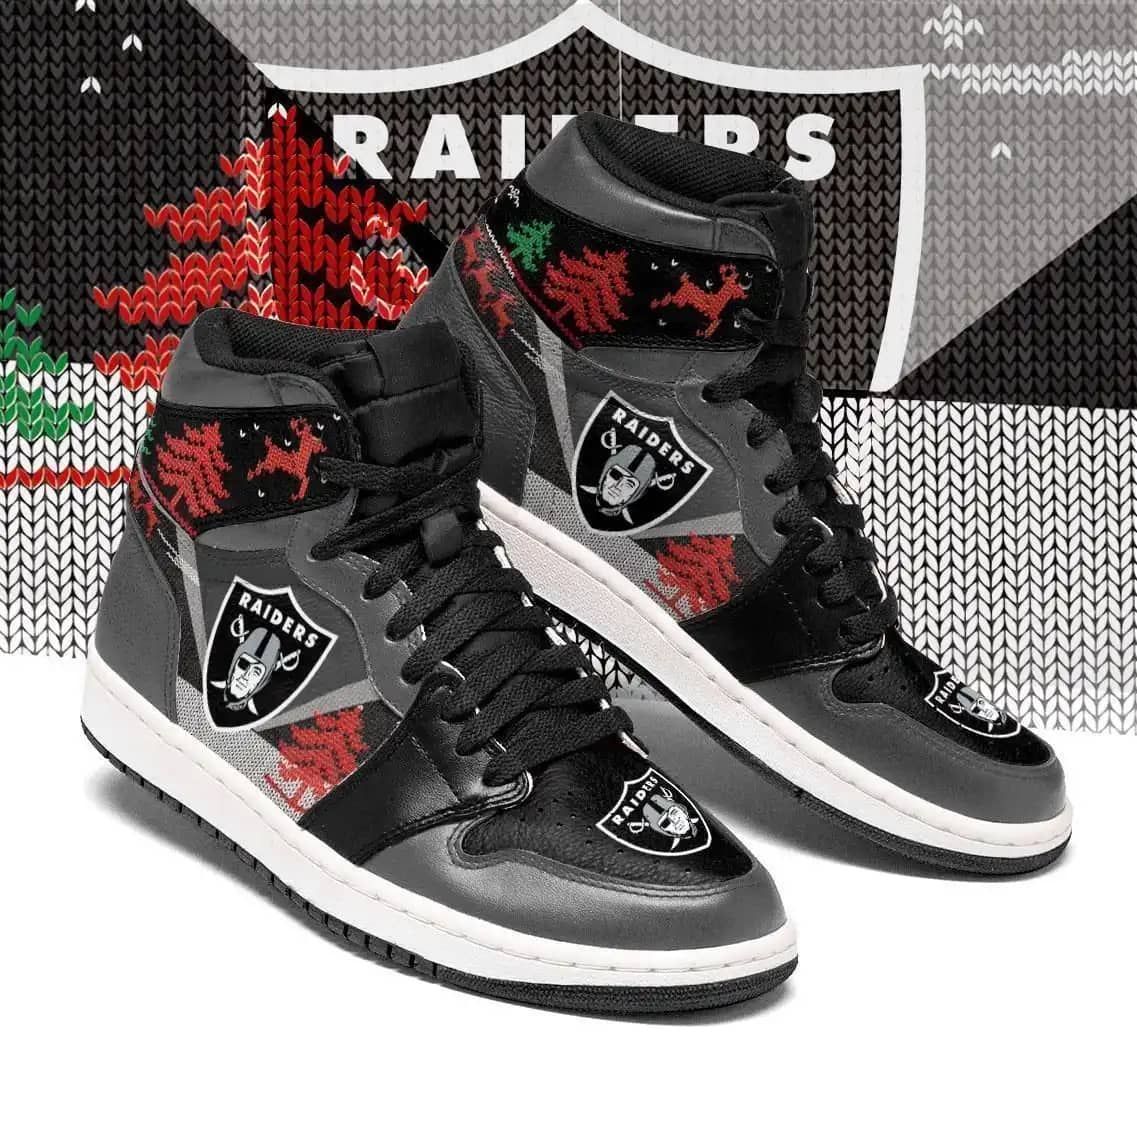 Festive Oakland Raiders Nfl Football Sneakers Team Perfect Gift For Sports Fans Air Jordan Shoes